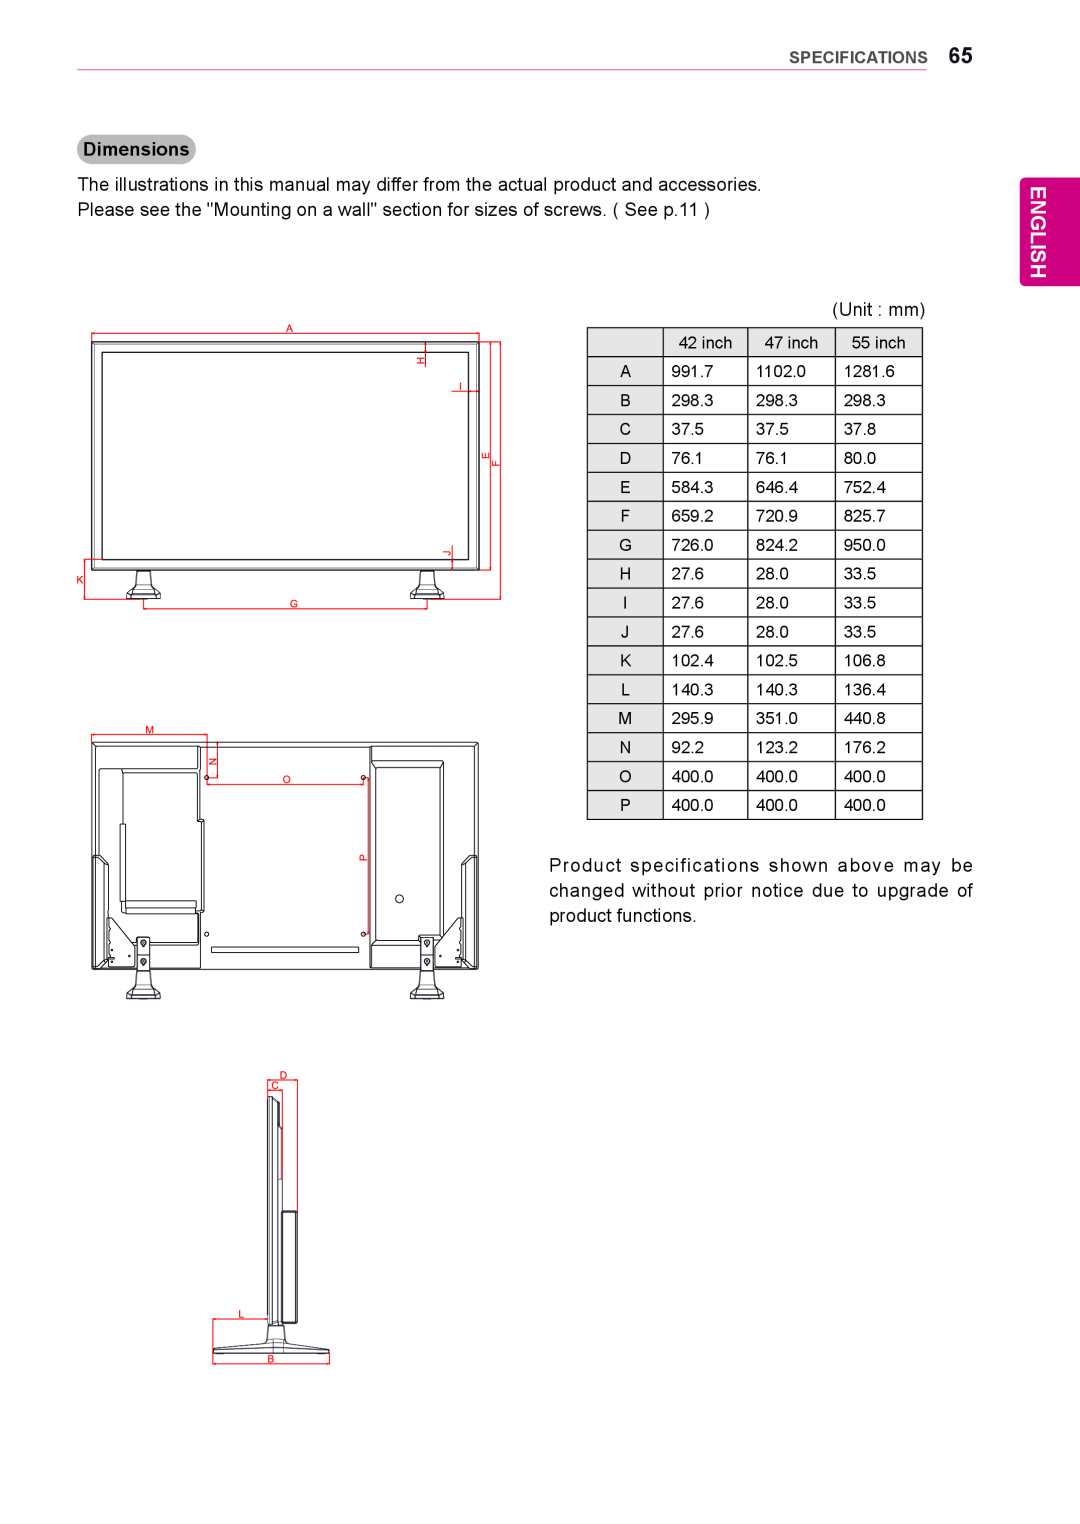 LG Electronics 55WS10, 42WS10, 47WS10 owner manual English, Dimensions, Specifications 